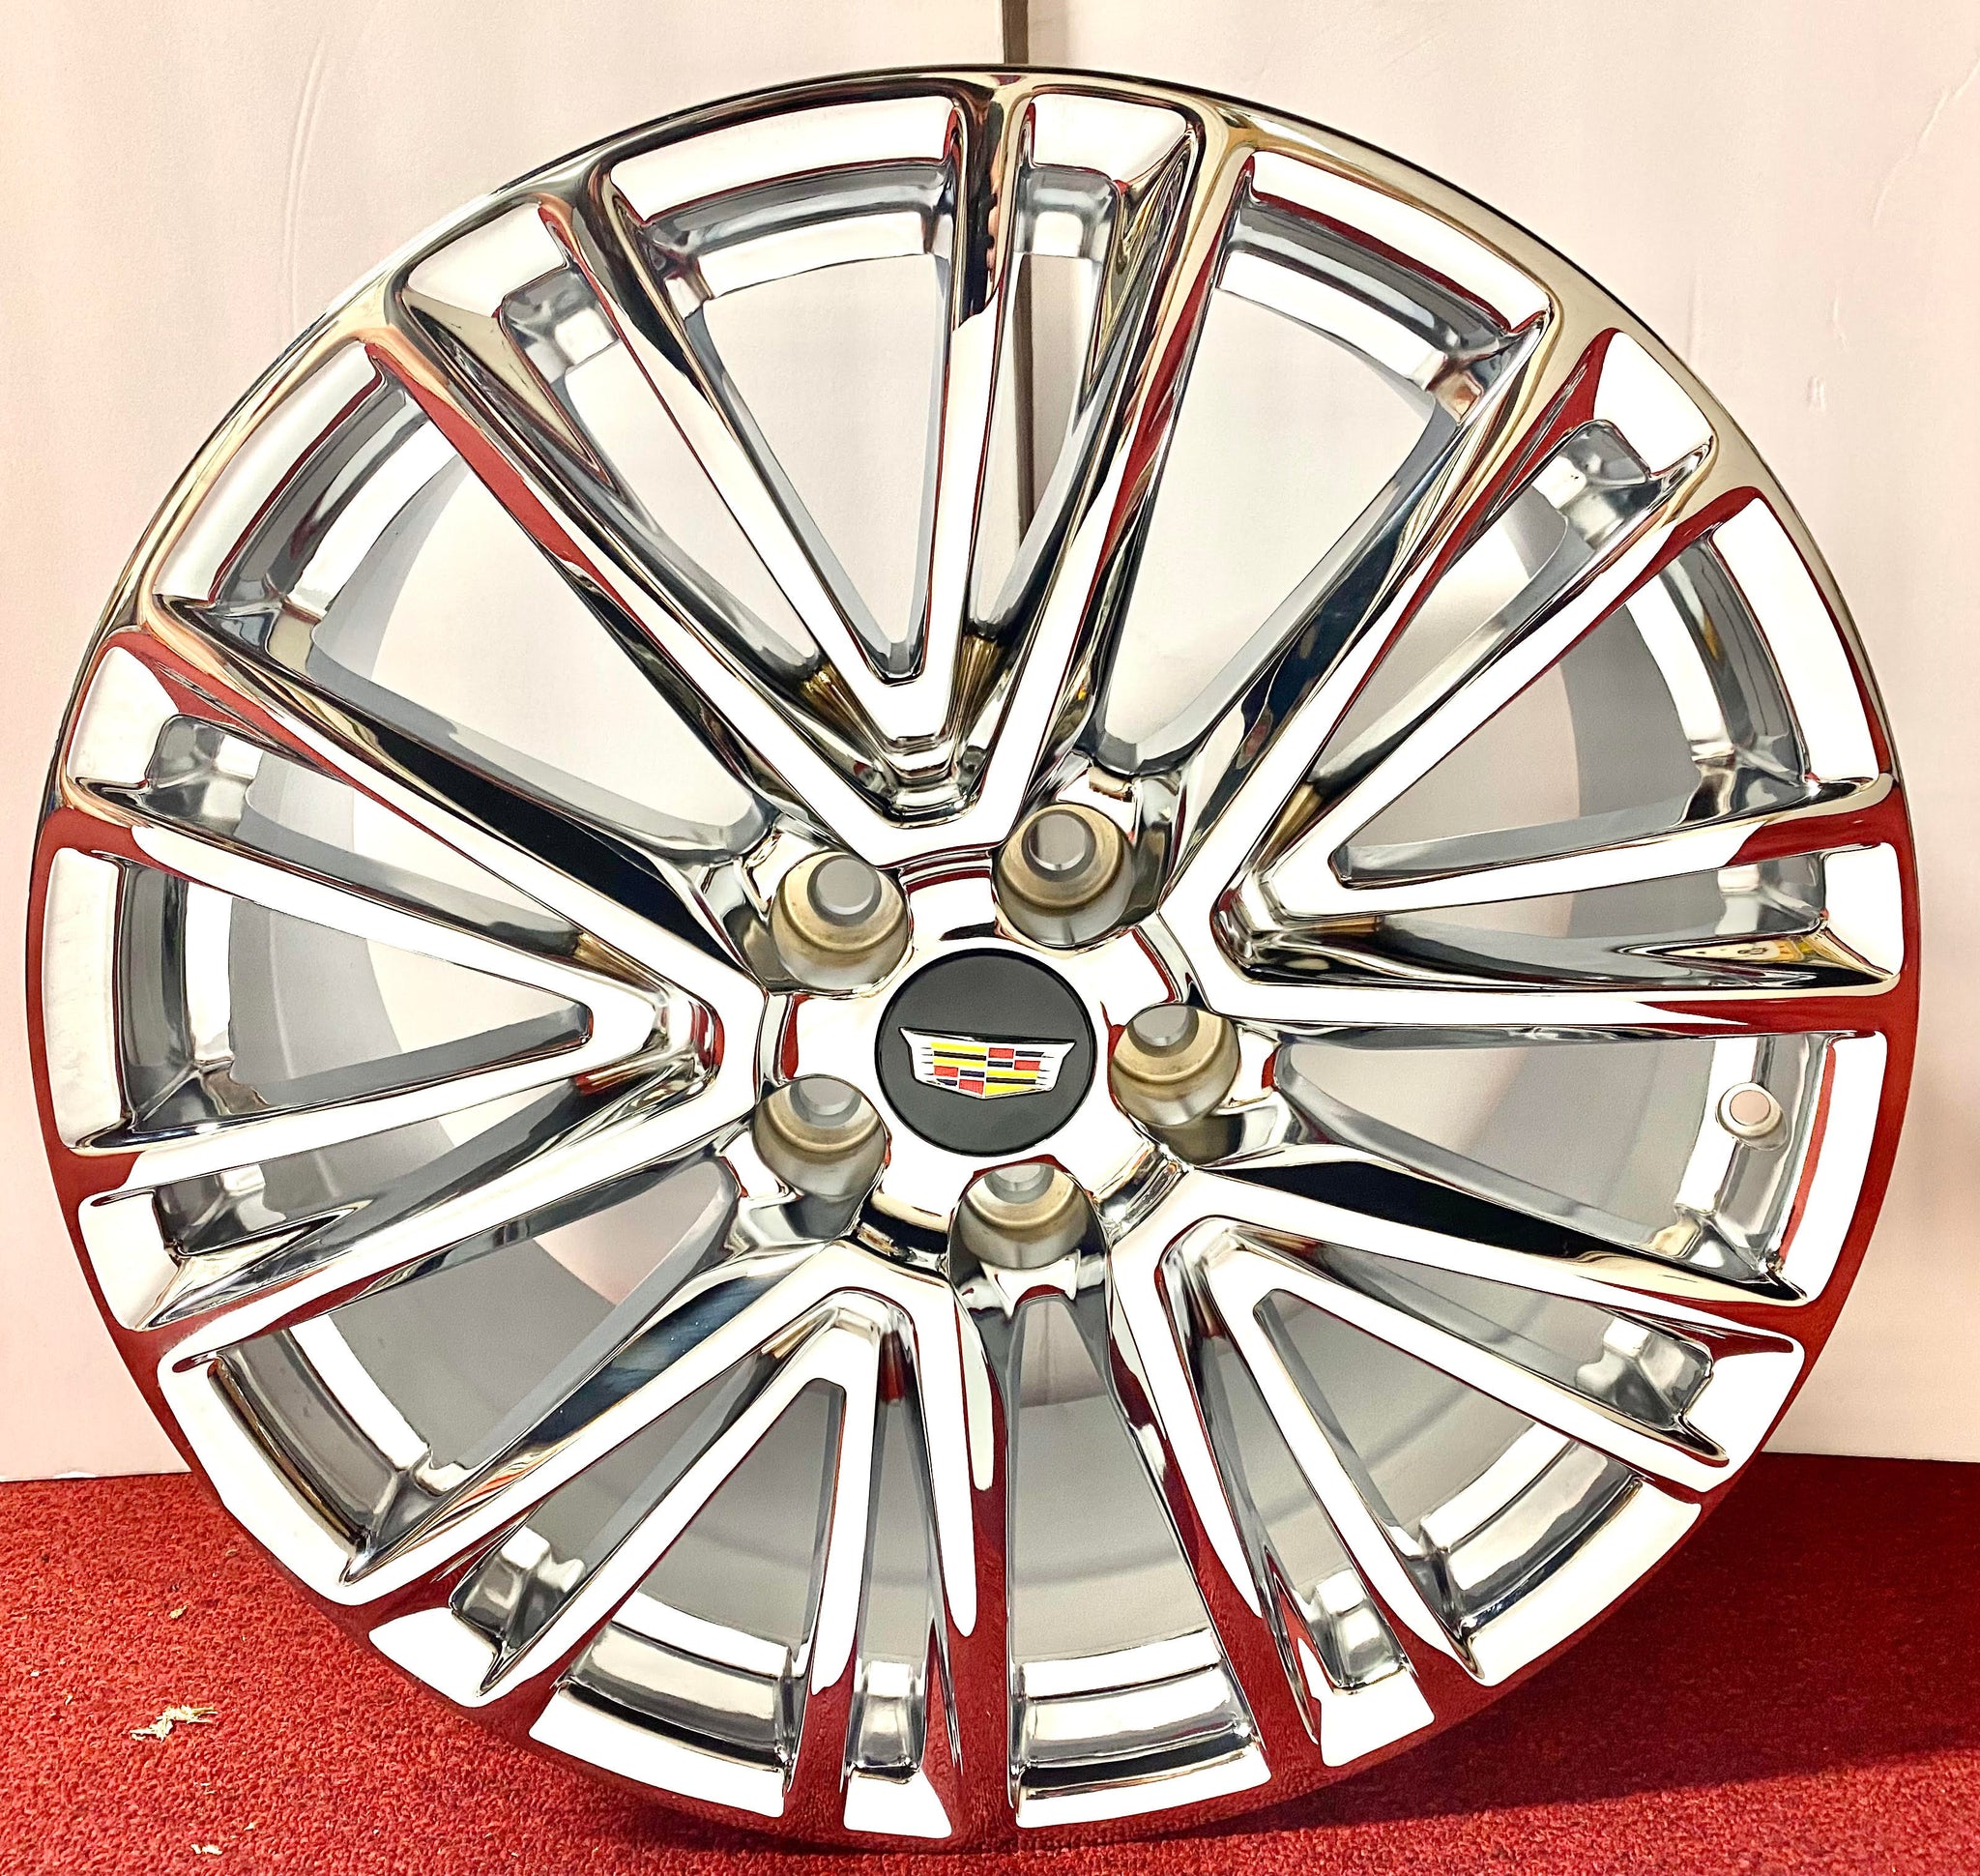 Cadillac FACTORY TRIPLE CHROME PLATED 20" WHEELS FIT CTS XTS XT4 CT5 CT6 SUPER RARE